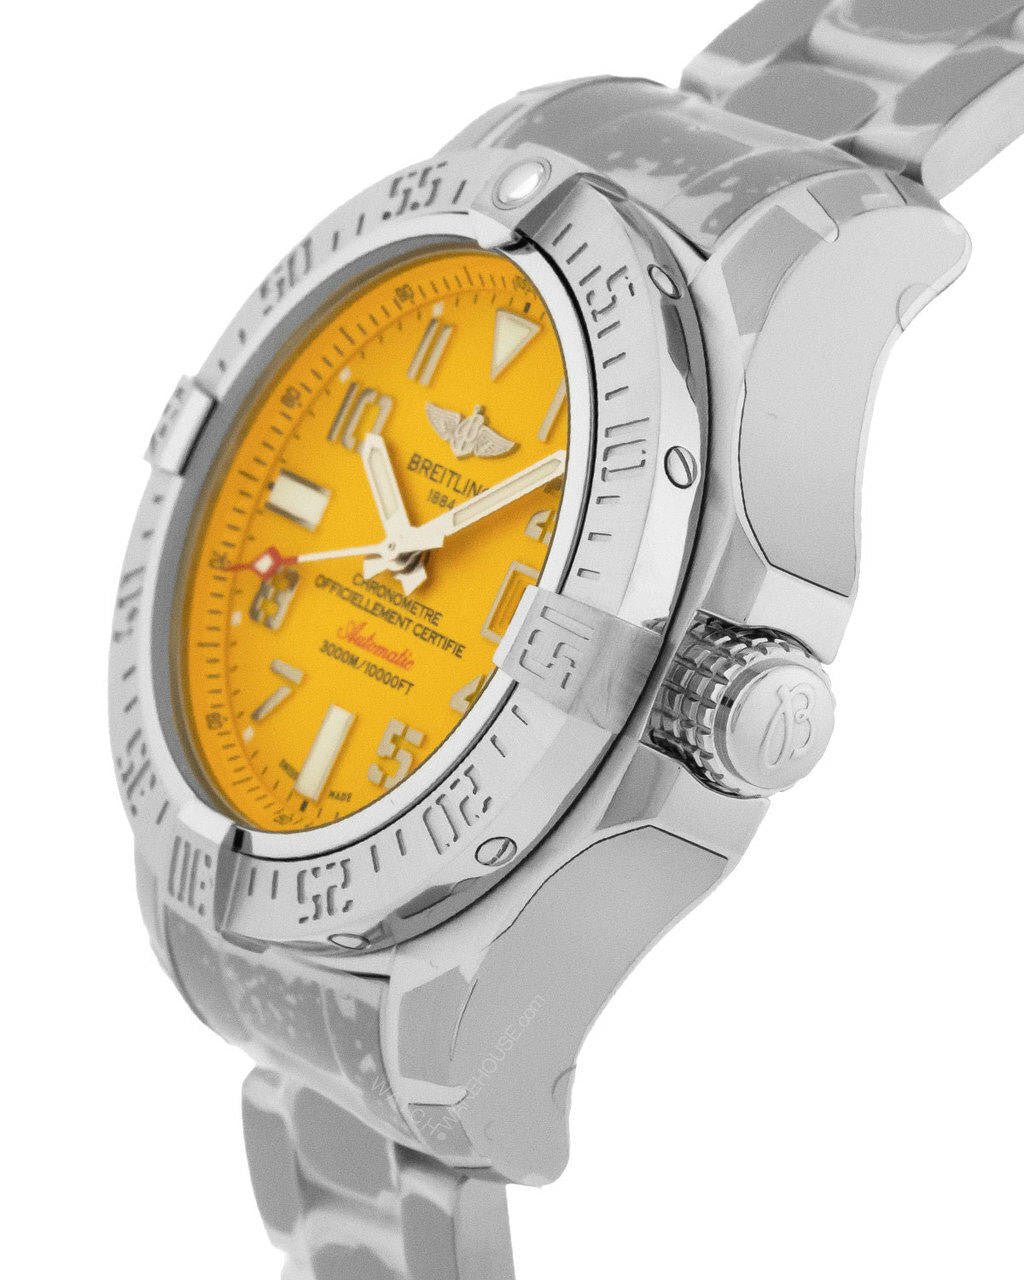 Breitling Avenger II Seawolf Yellow Dial Silver Steel Strap Mens Watch - A1733110/I519